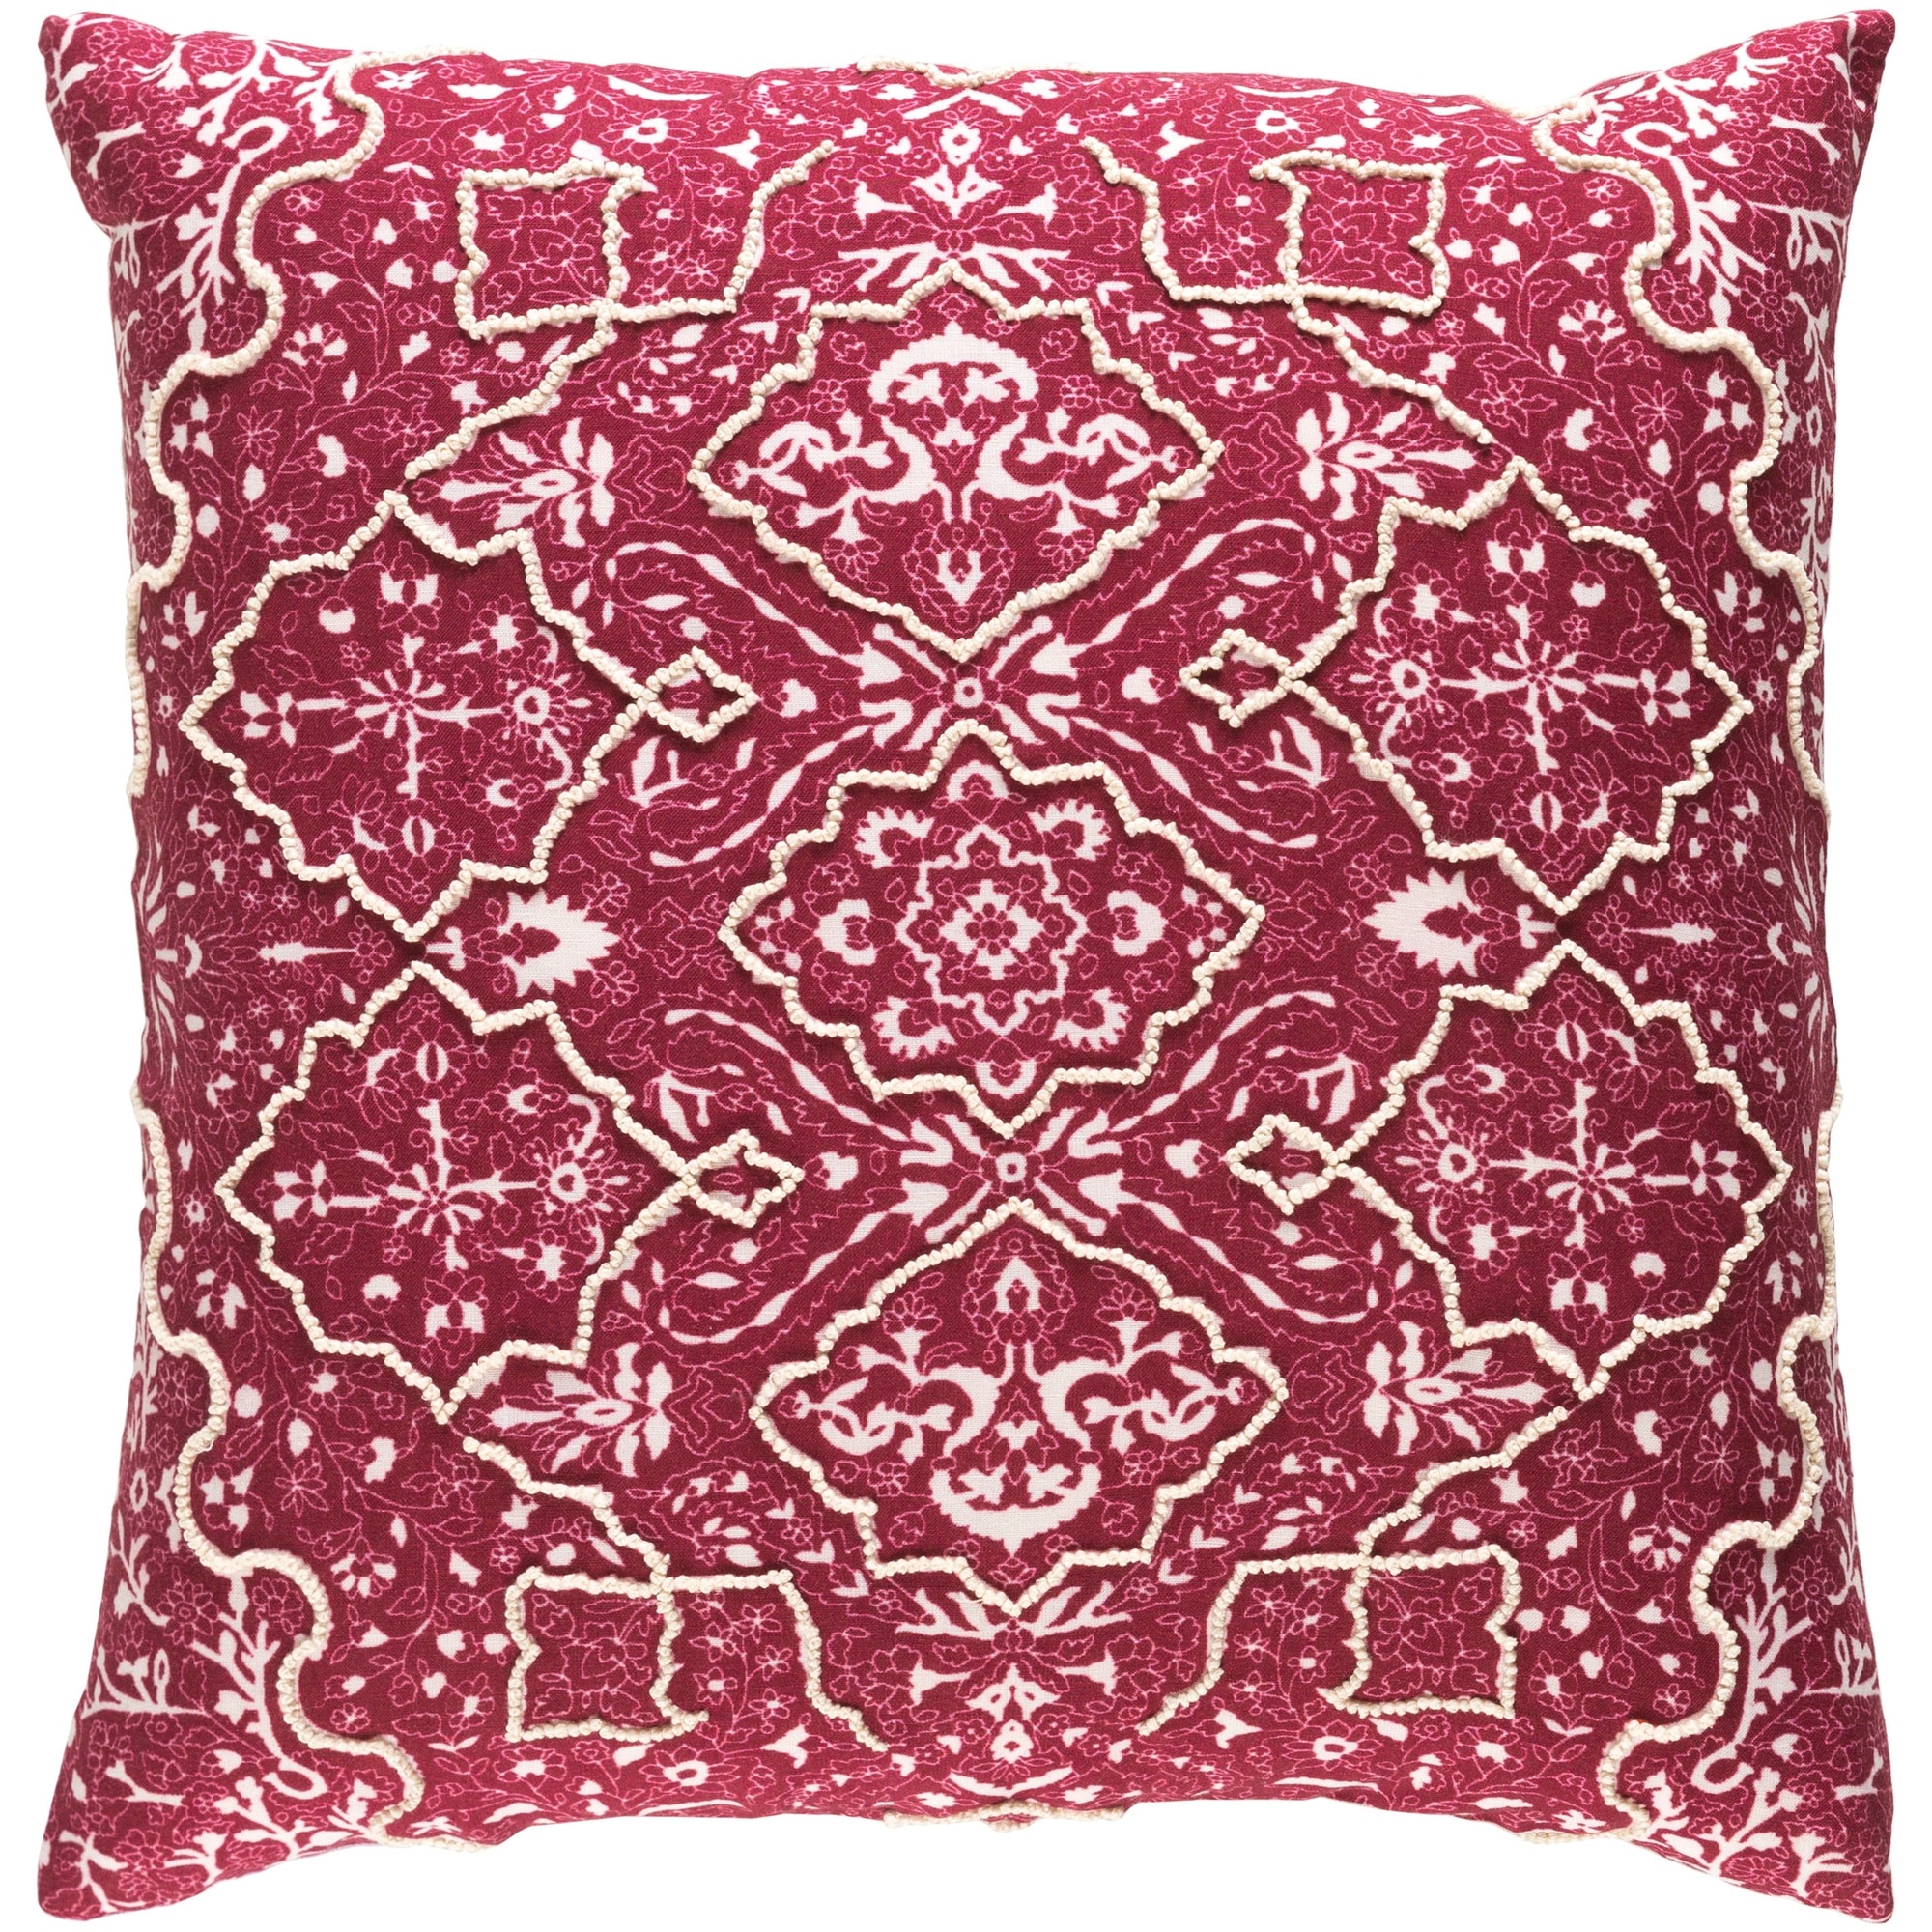 Decorative Maroon 22-inch Throw Pillow Cover Red Applique Bohemian Eclectic Cotton Linen One Removable